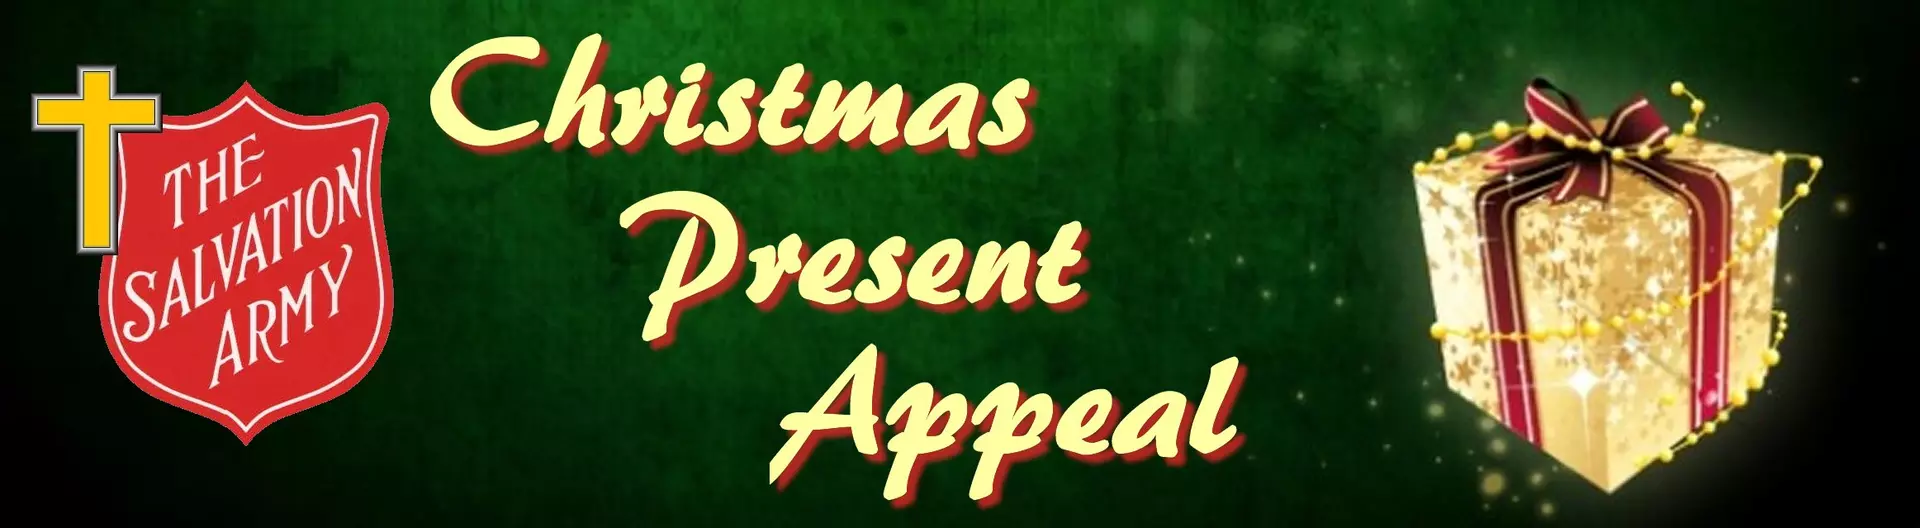 Christmas Present Appeal